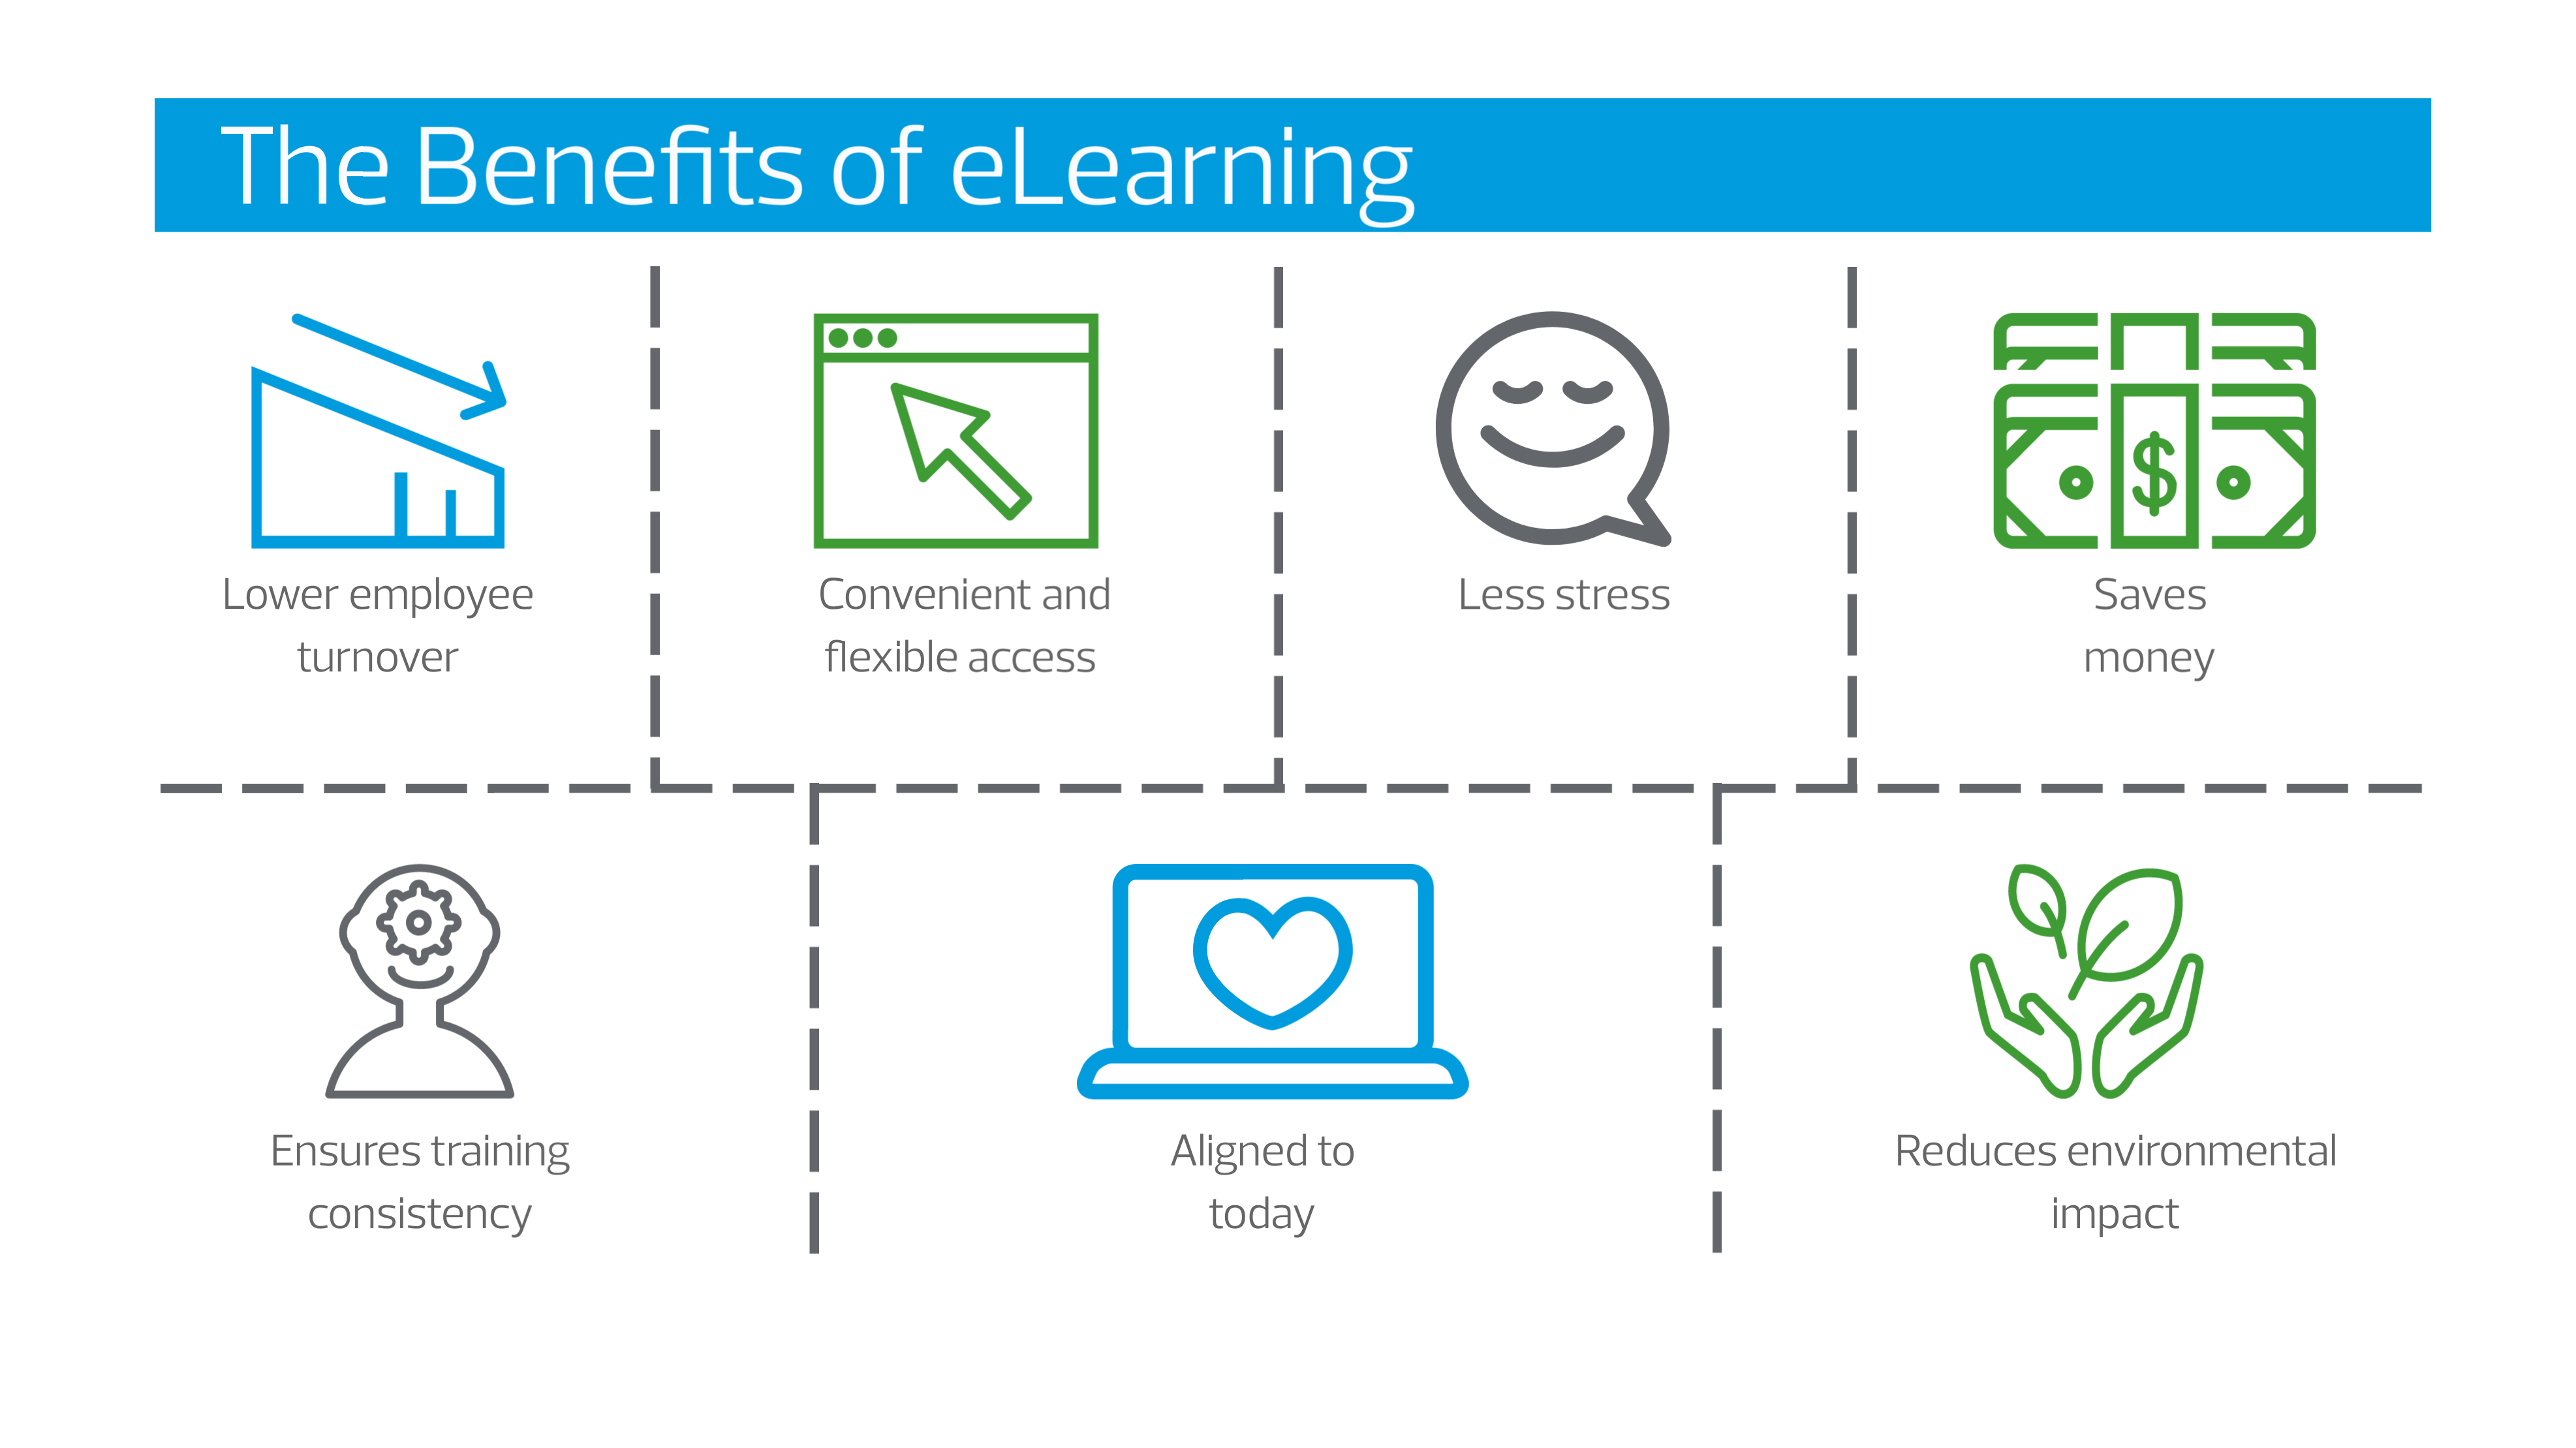 The Benefits of eLearning